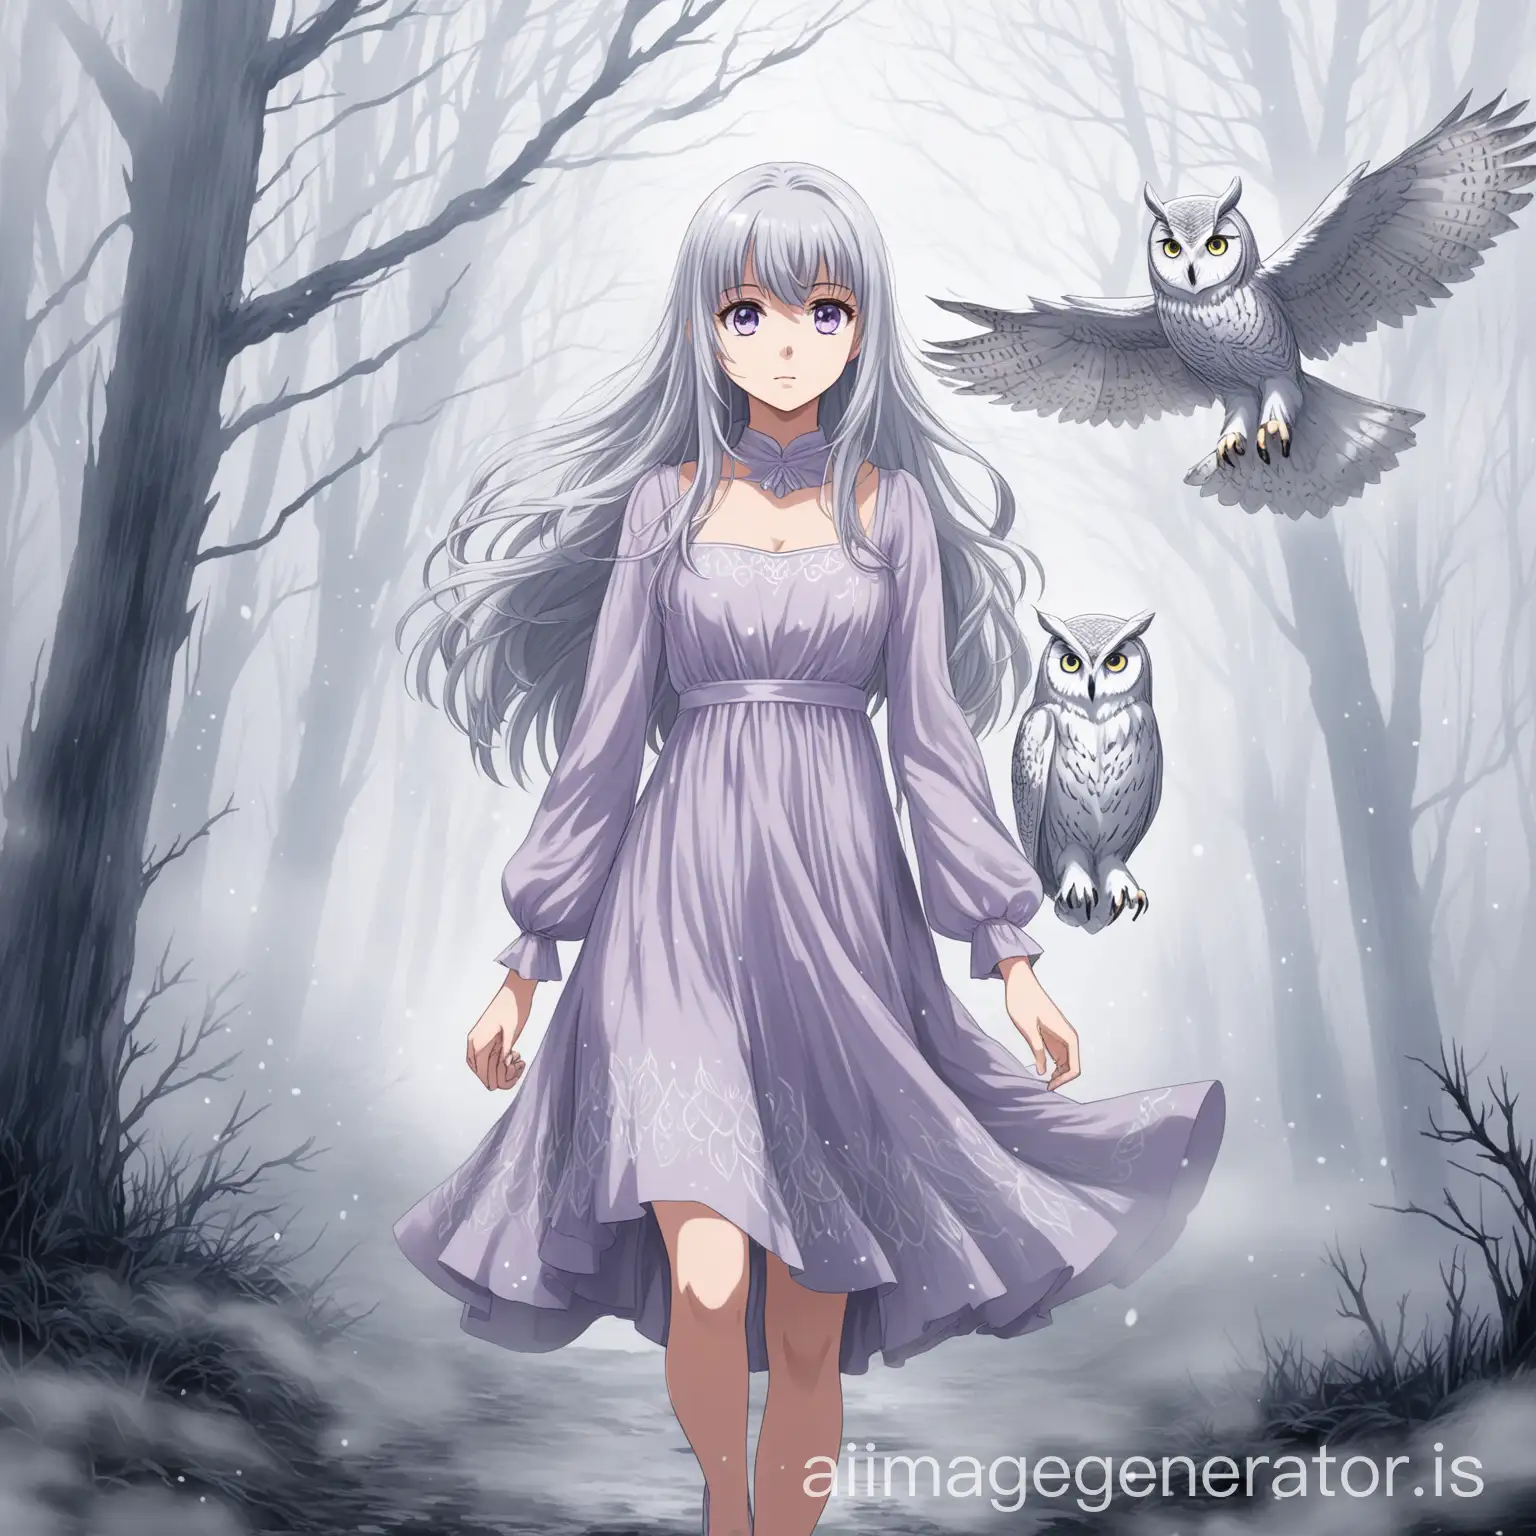 Pretty anime girl, wearing a light purple dress, with long silver hair and silver eyes, walking in the fog with a silver owl following her